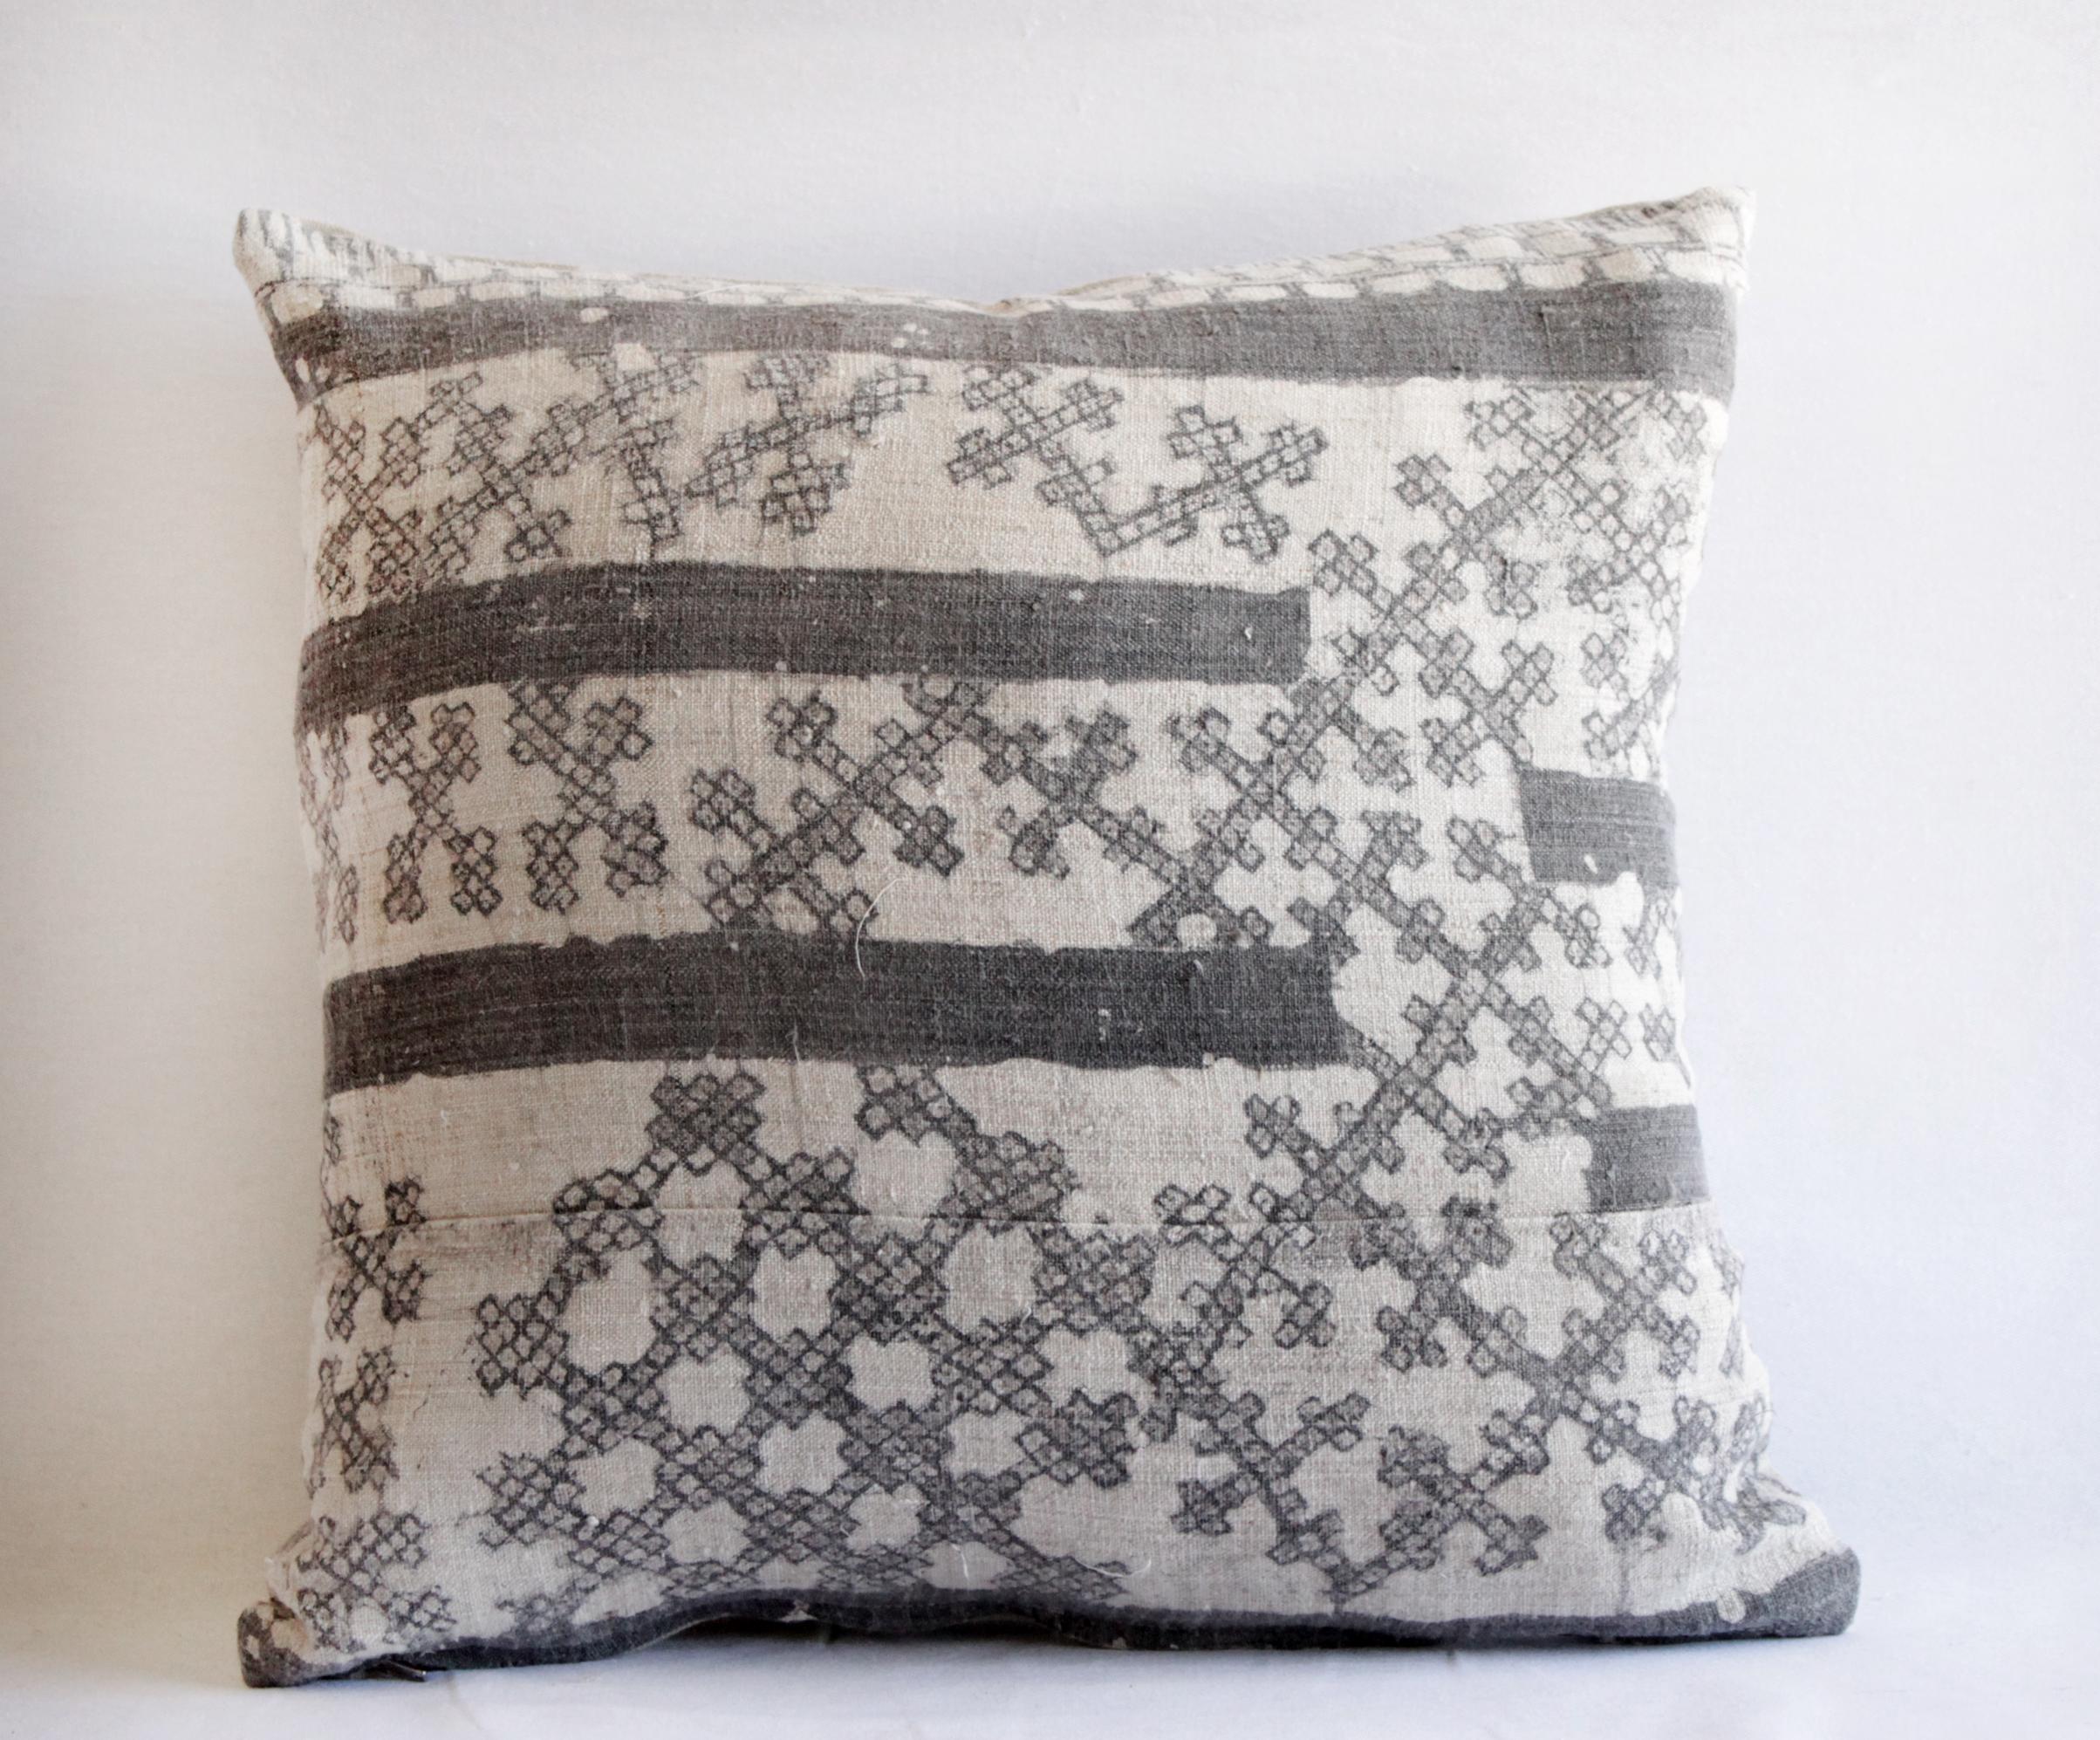 Vintage batik accent pillow charcoal and natural linen
This is a beautiful vintage textile piece we have created into a pillow. The front side is a linen weave, light natural color background with a darker charcoal grey (faded black) batik